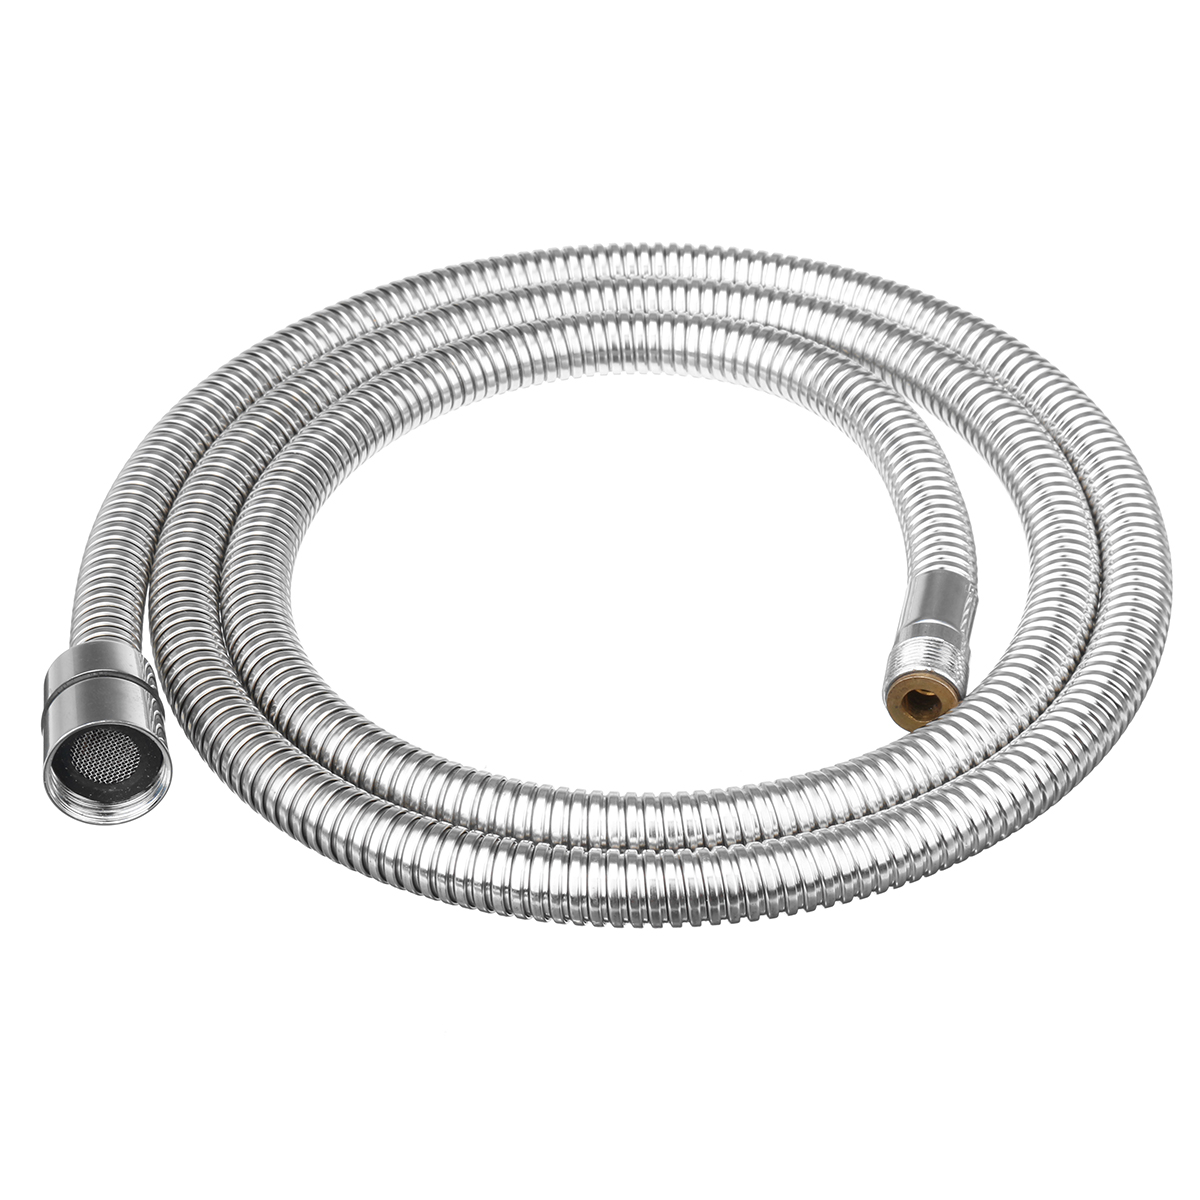 Flexible-Pull-Out-Spray-Water-Hose-Basin-Tap-Hose-Replacement-for-Home-Kitchen-Bath-1193432